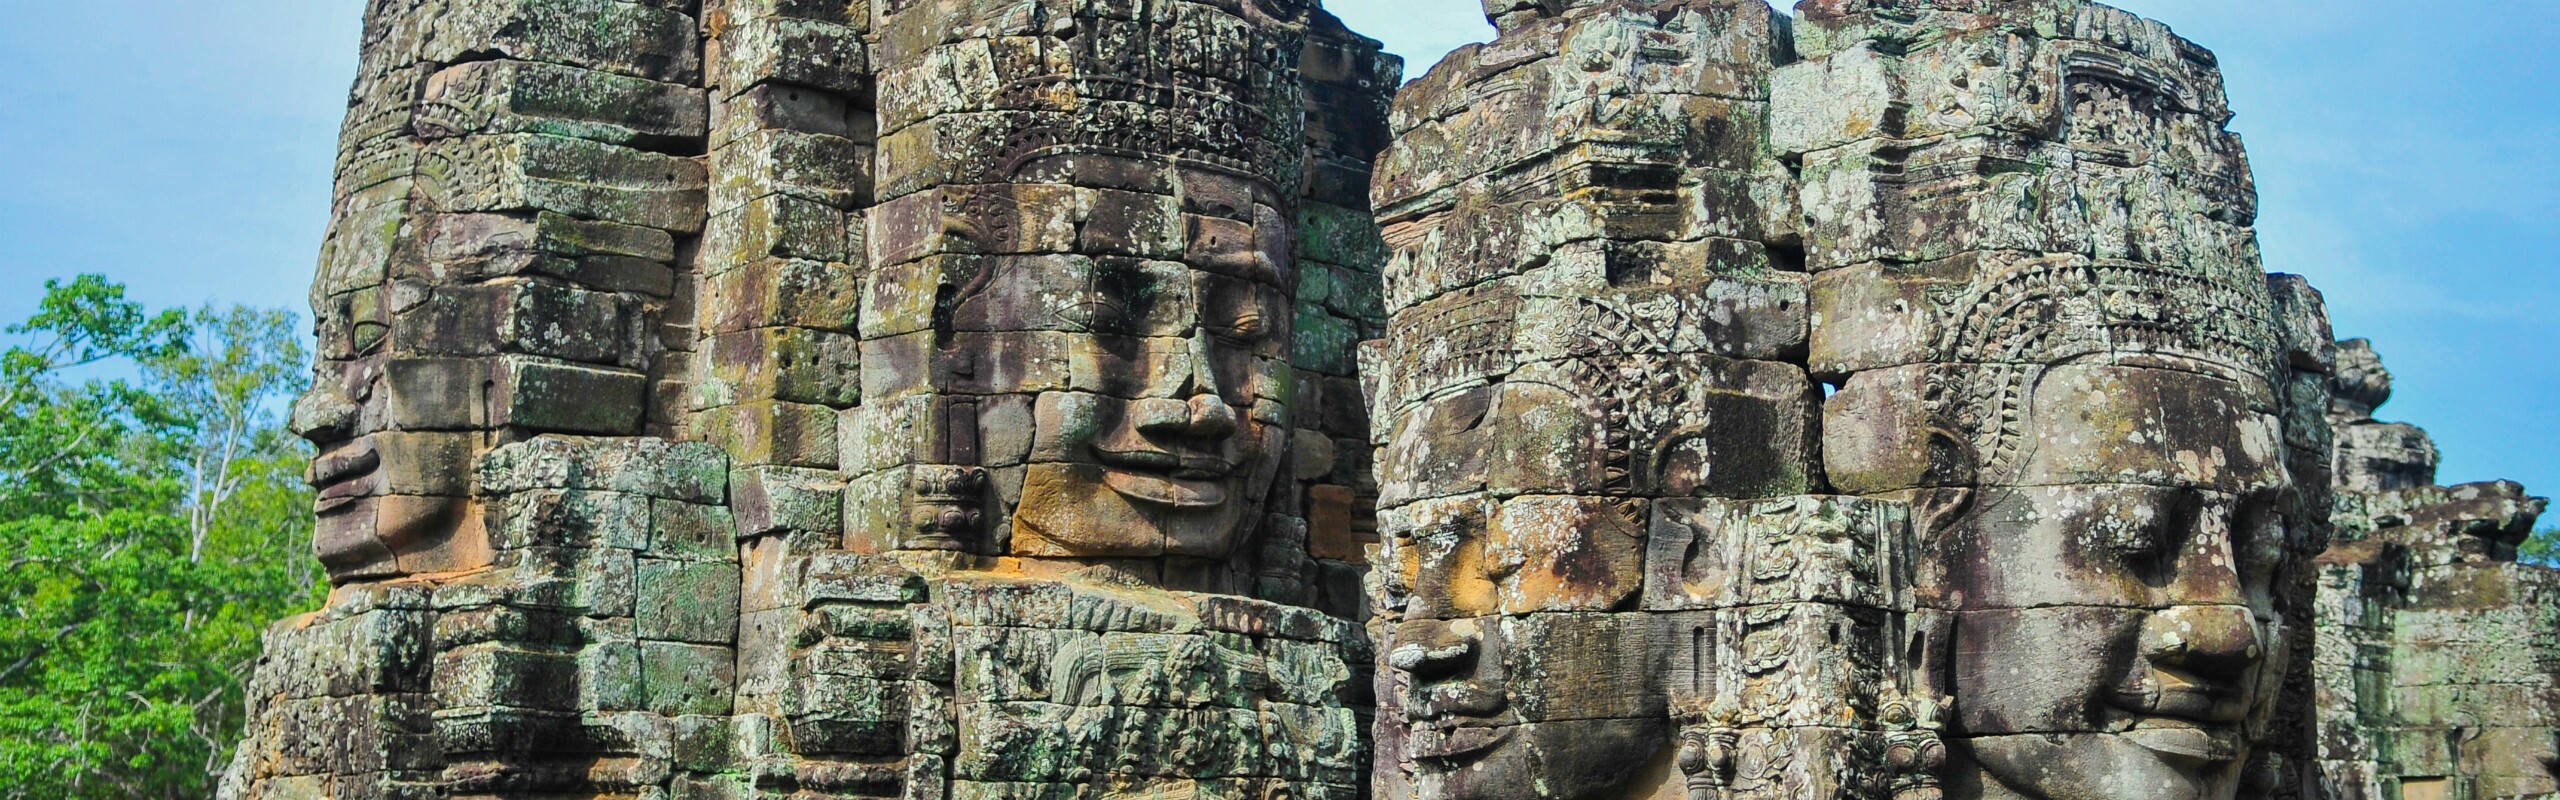 9 Things You Should Know Before Visiting Cambodia 